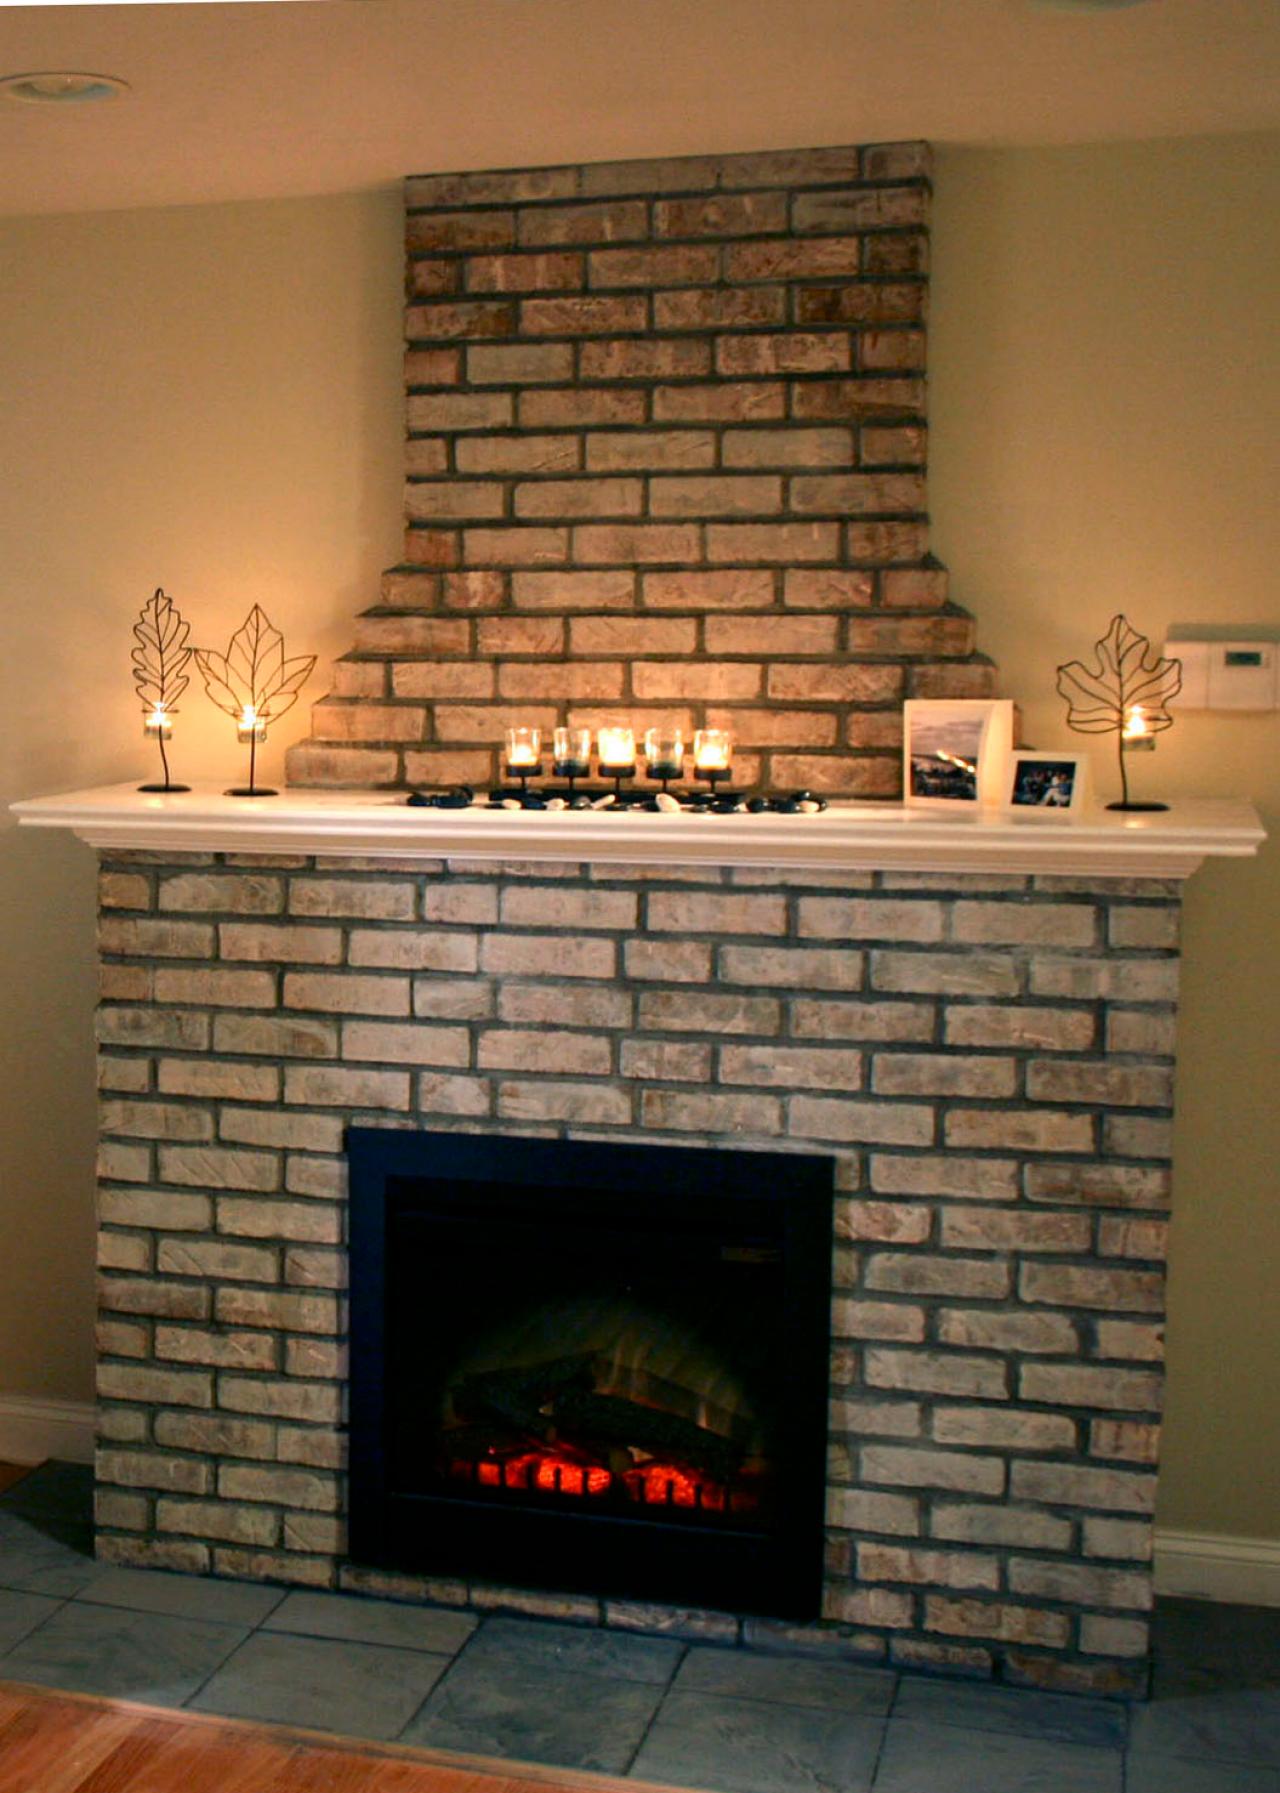 Electric Fireplace With Brick Facade, Cost Of Adding A Brick Fireplace